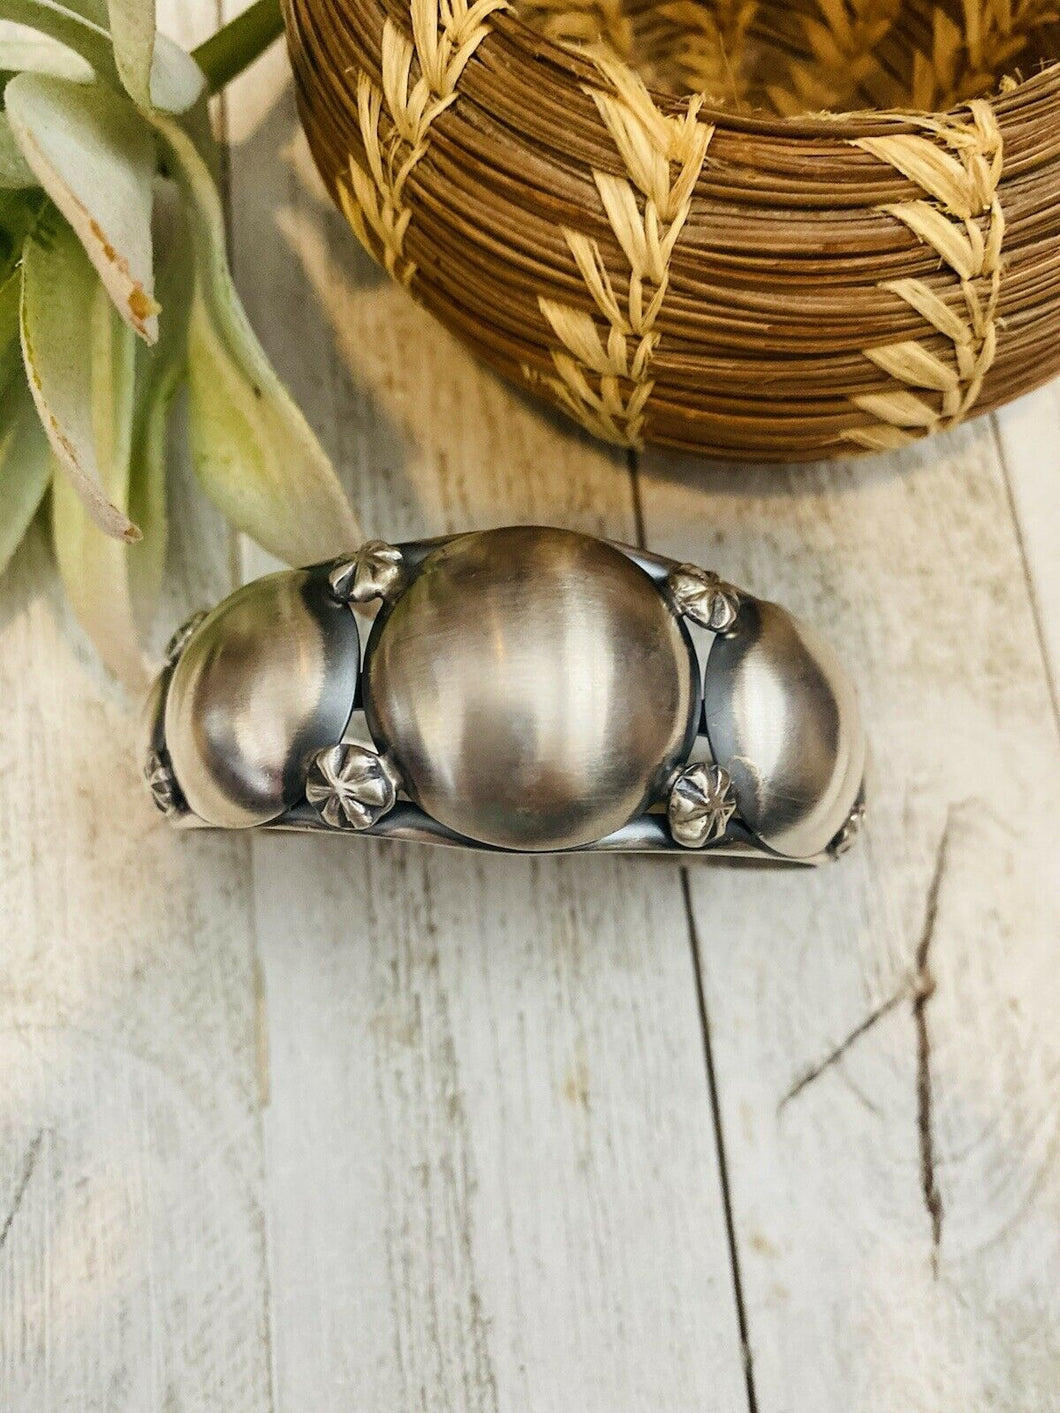 Navajo Sterling Silver Concho Cuff Bracelet By Emer Thompson